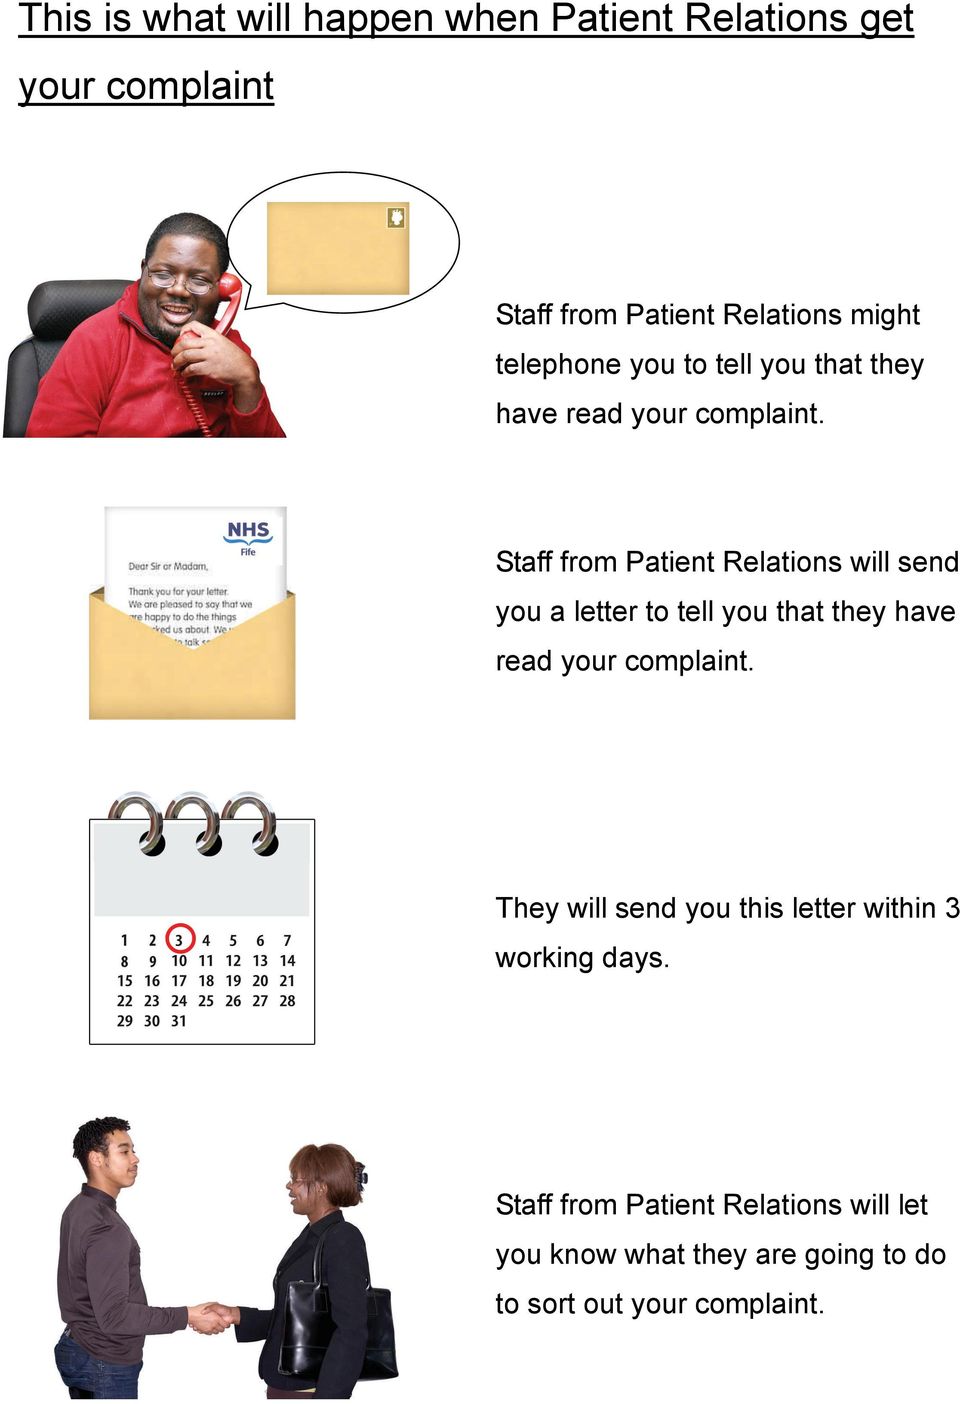 Staff from Patient Relations will send you a letter to tell you that they have read your complaint.